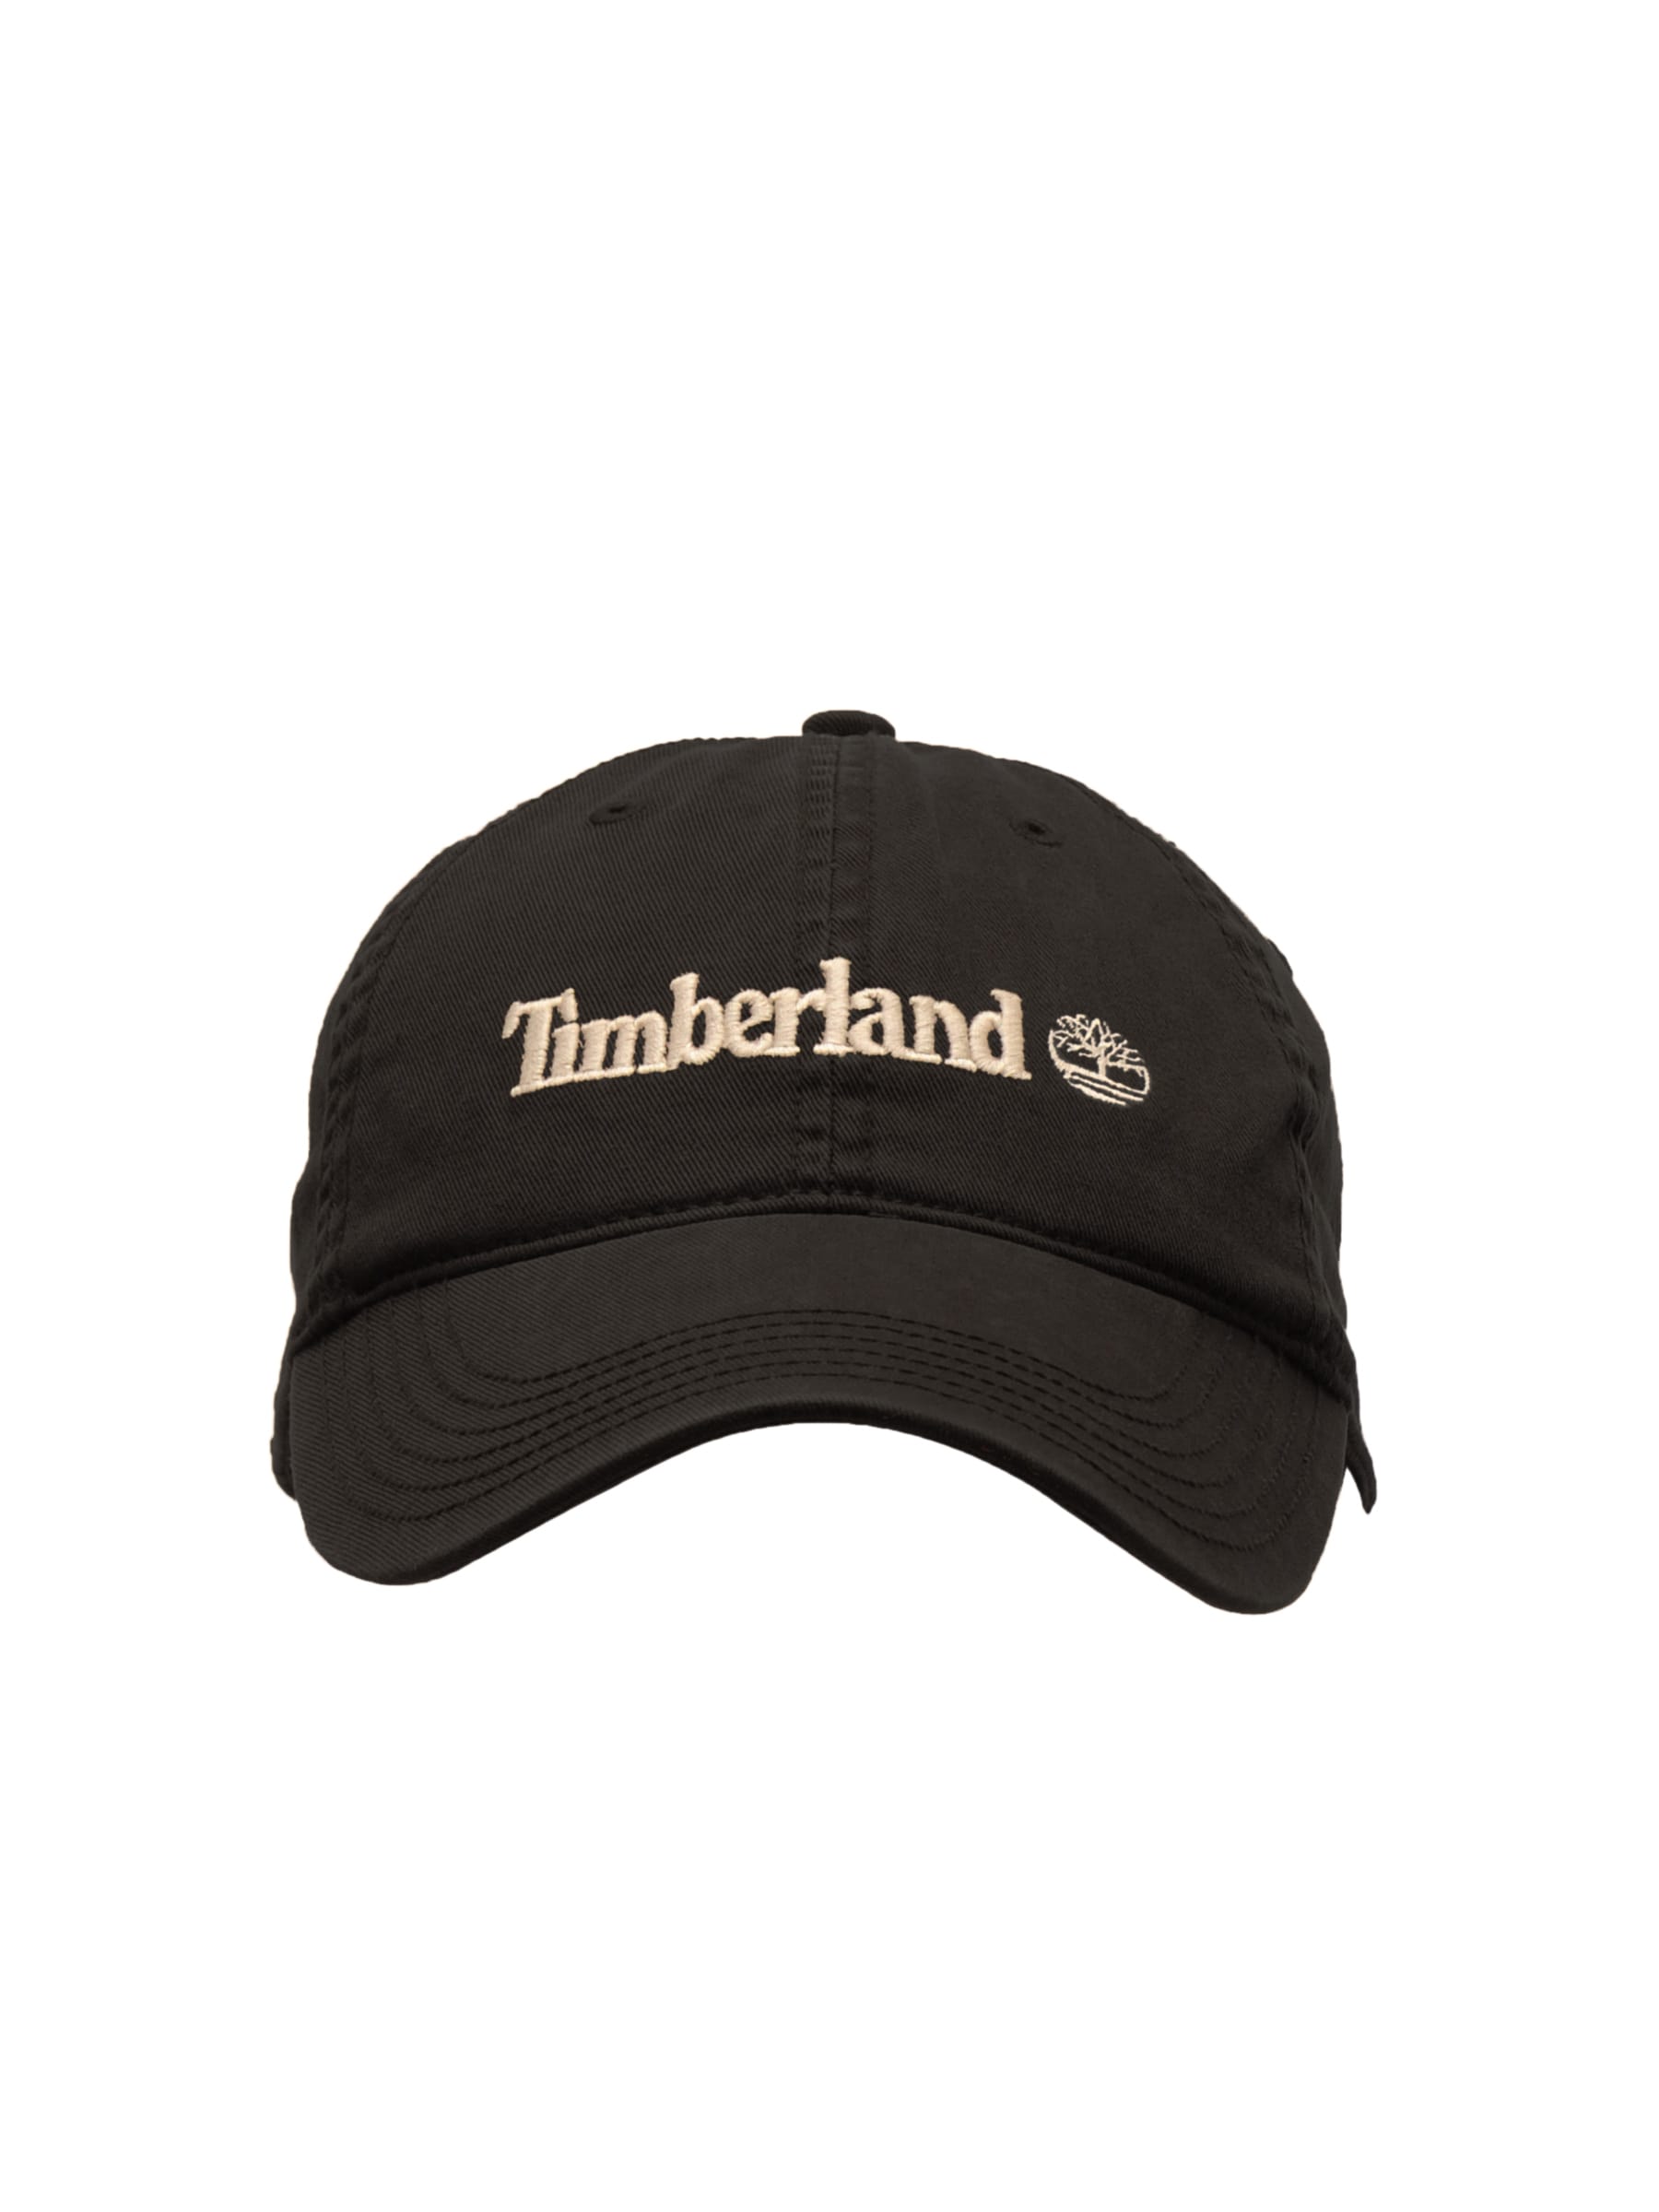 Timberland Unisex Casual Green Caps